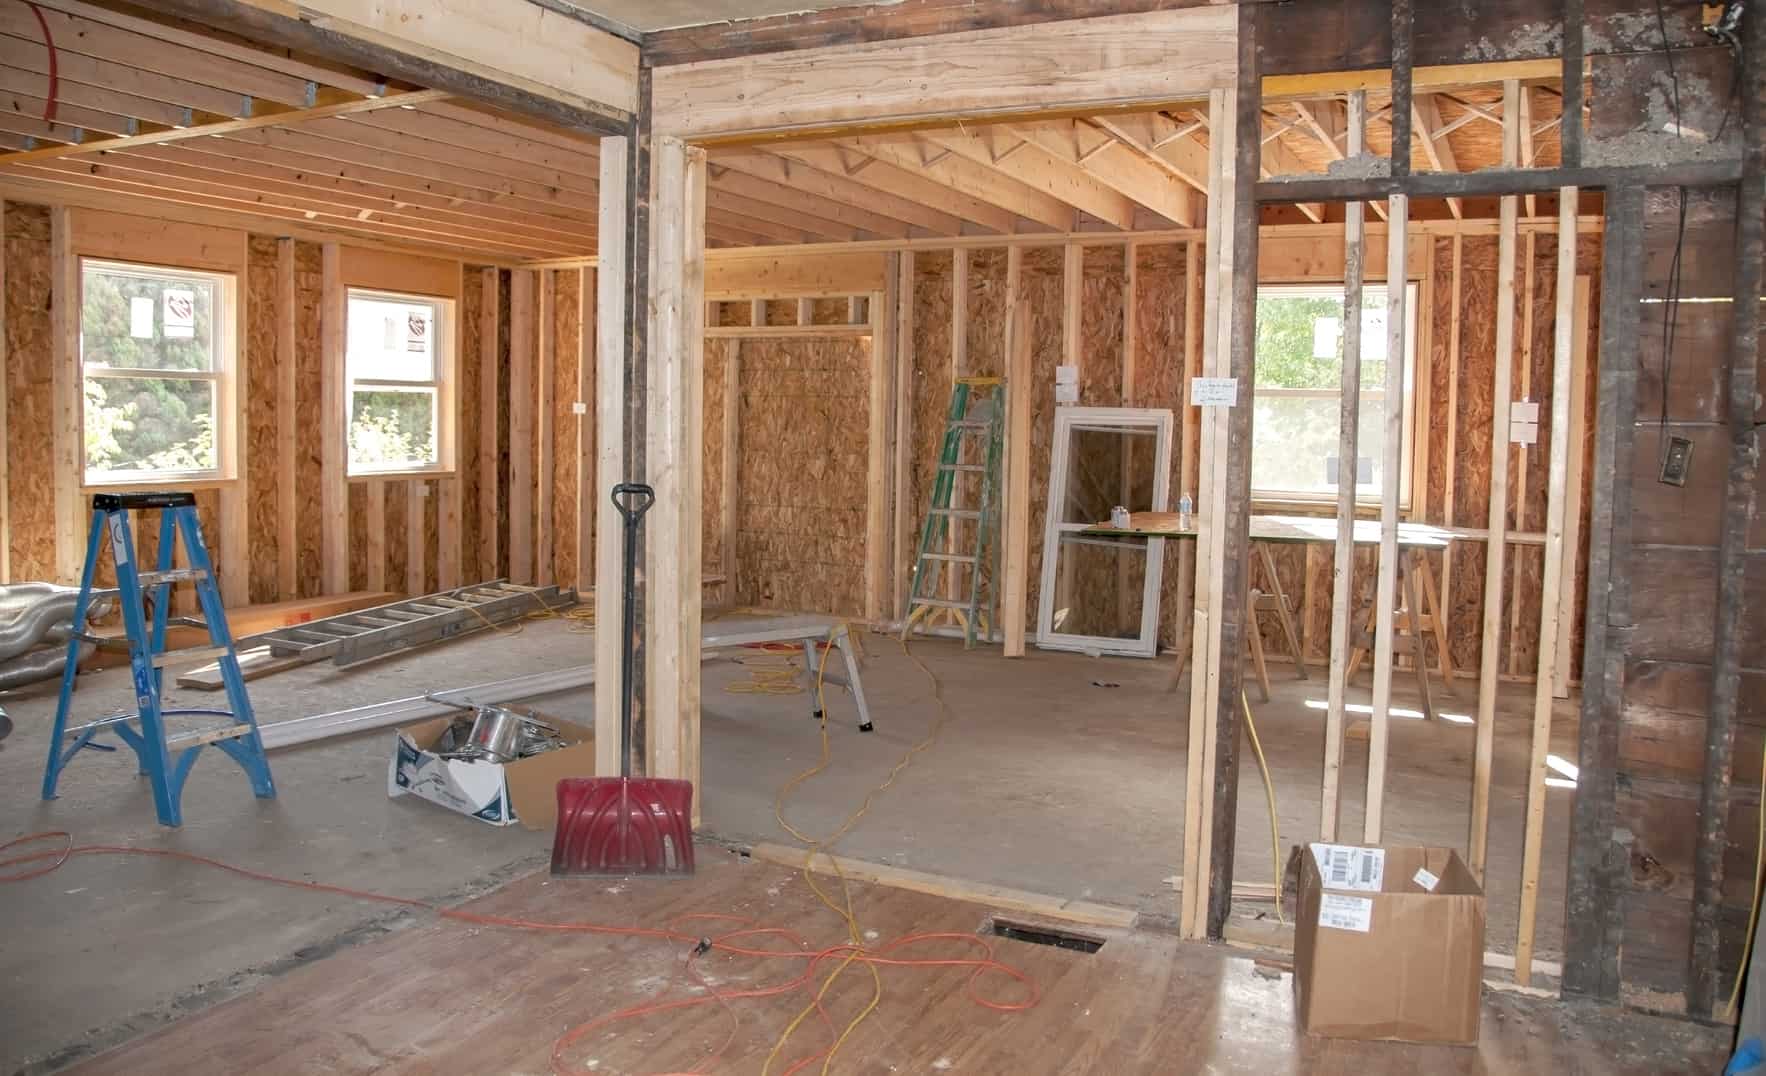 Home renovation activity starting to slide but costs keep rising